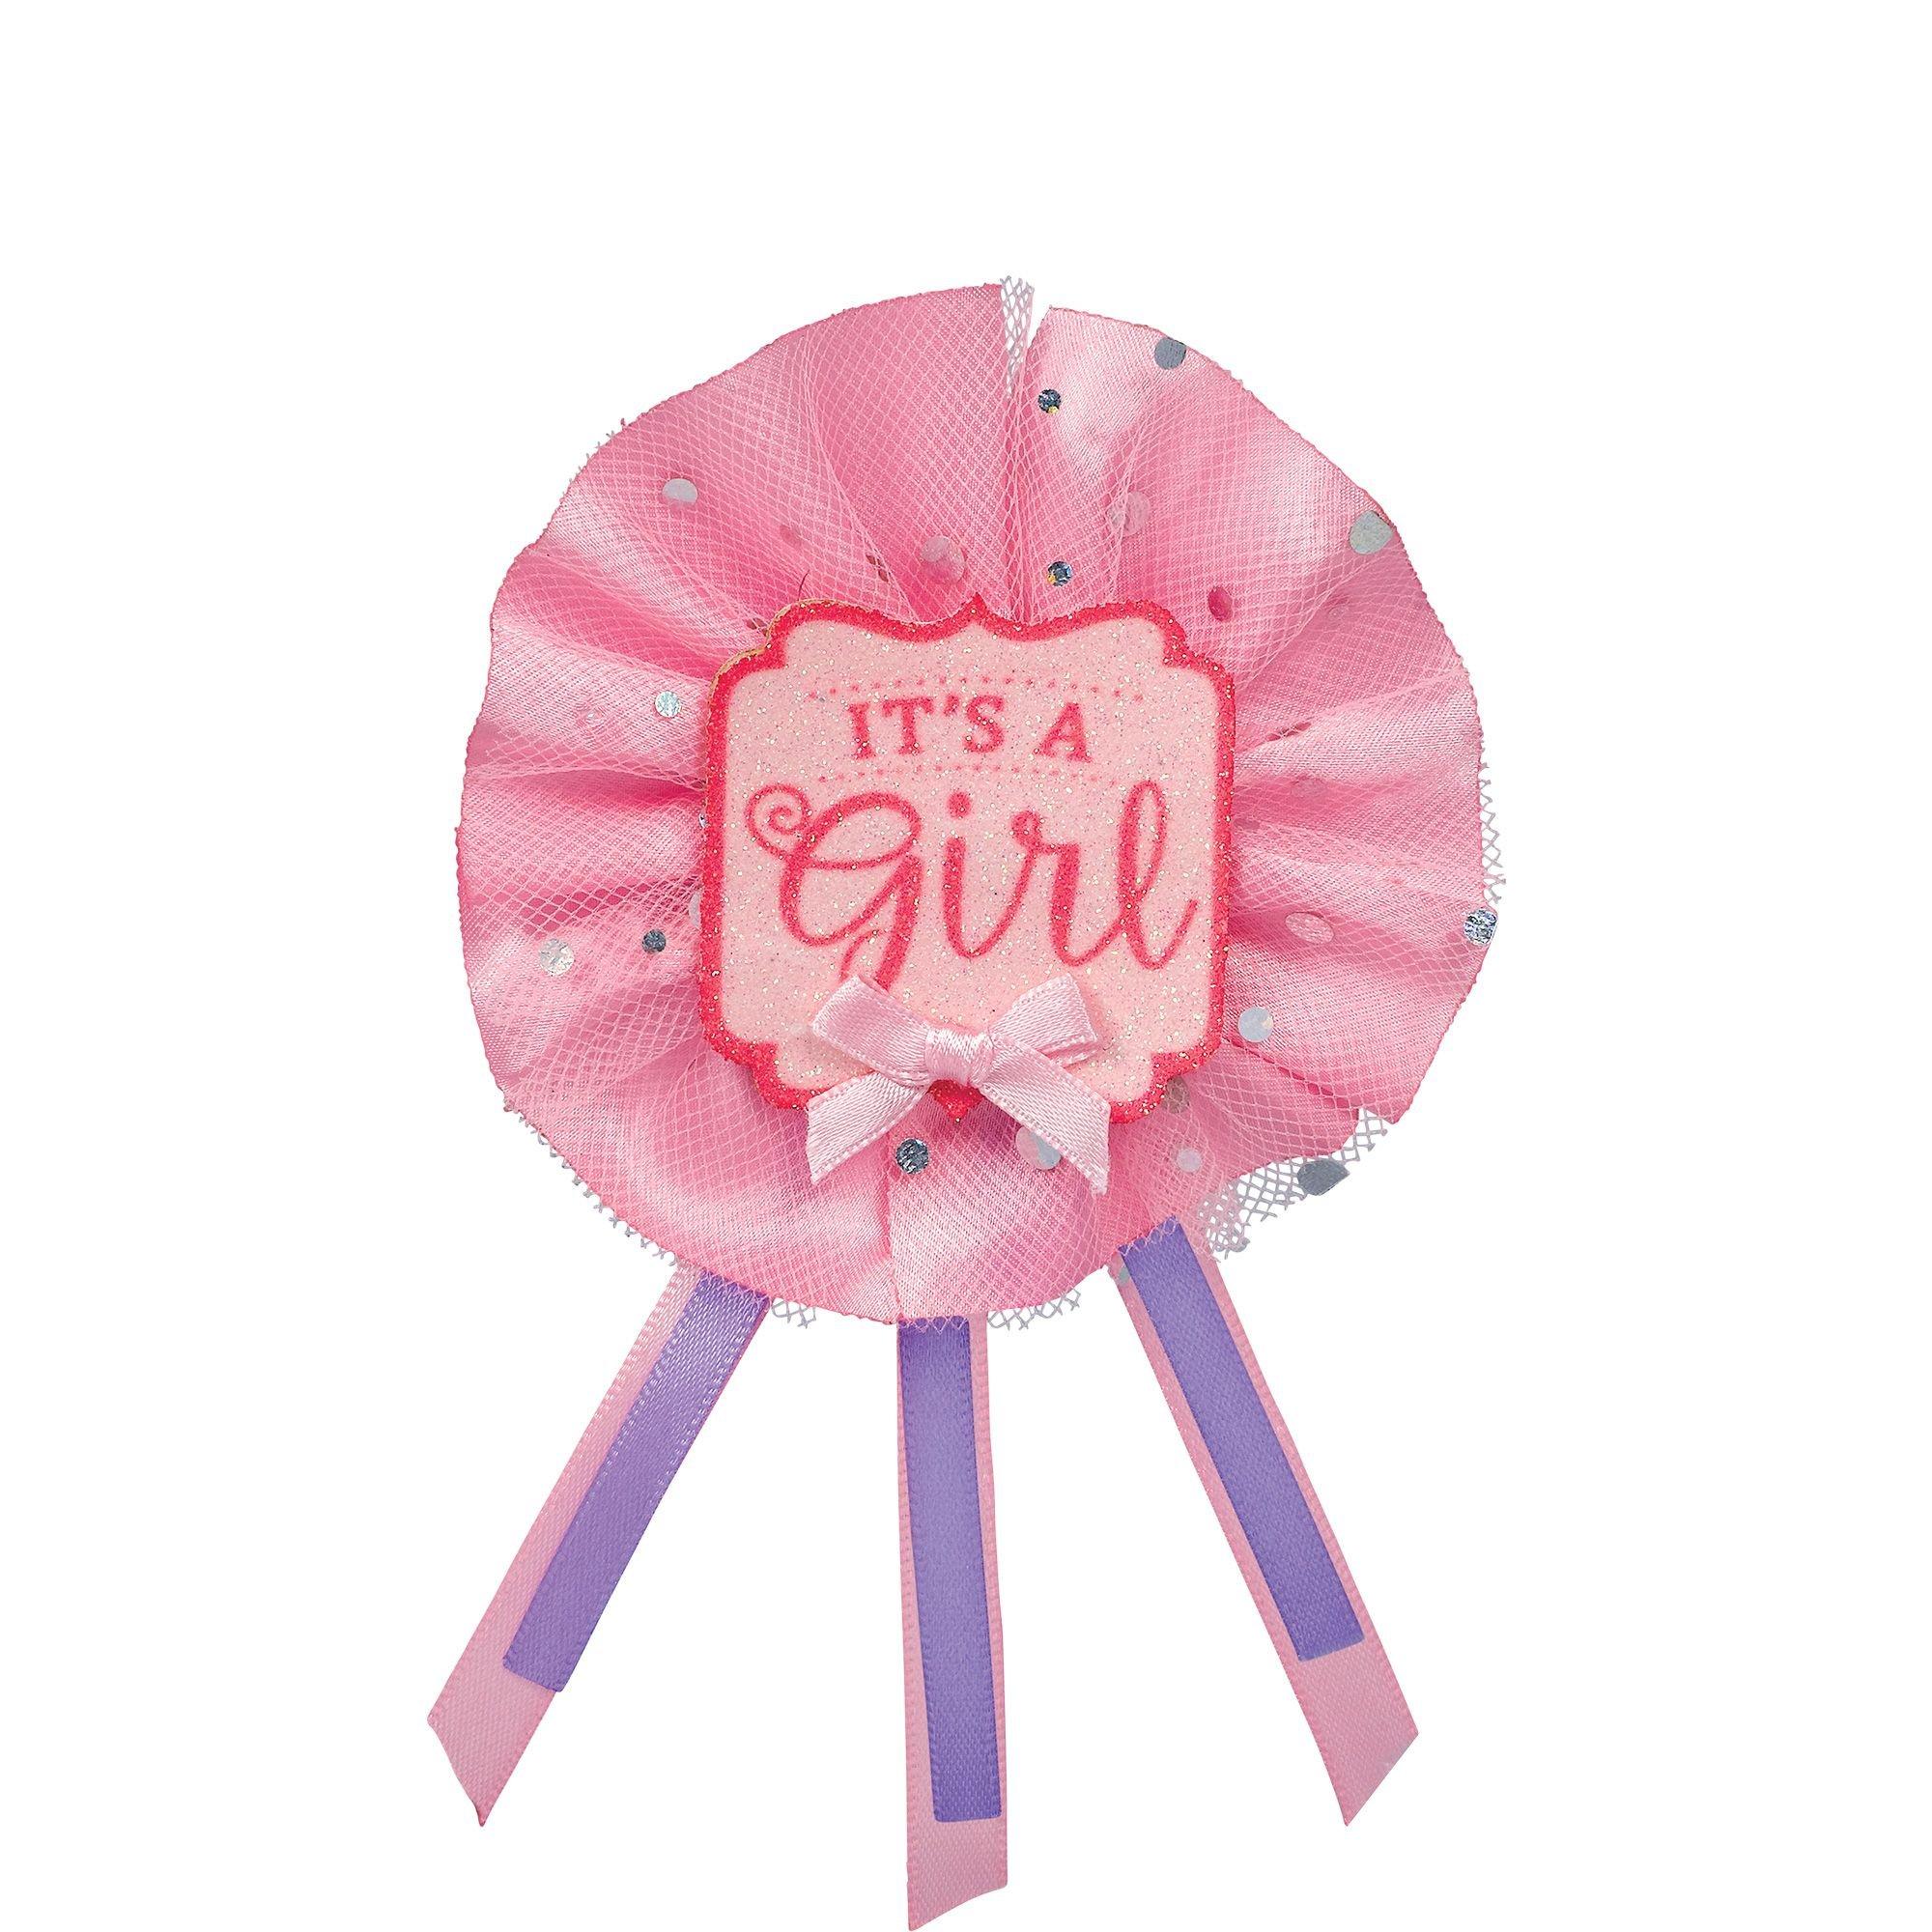 It's A Girl Pink Ribbon for Baby Gift or Shower